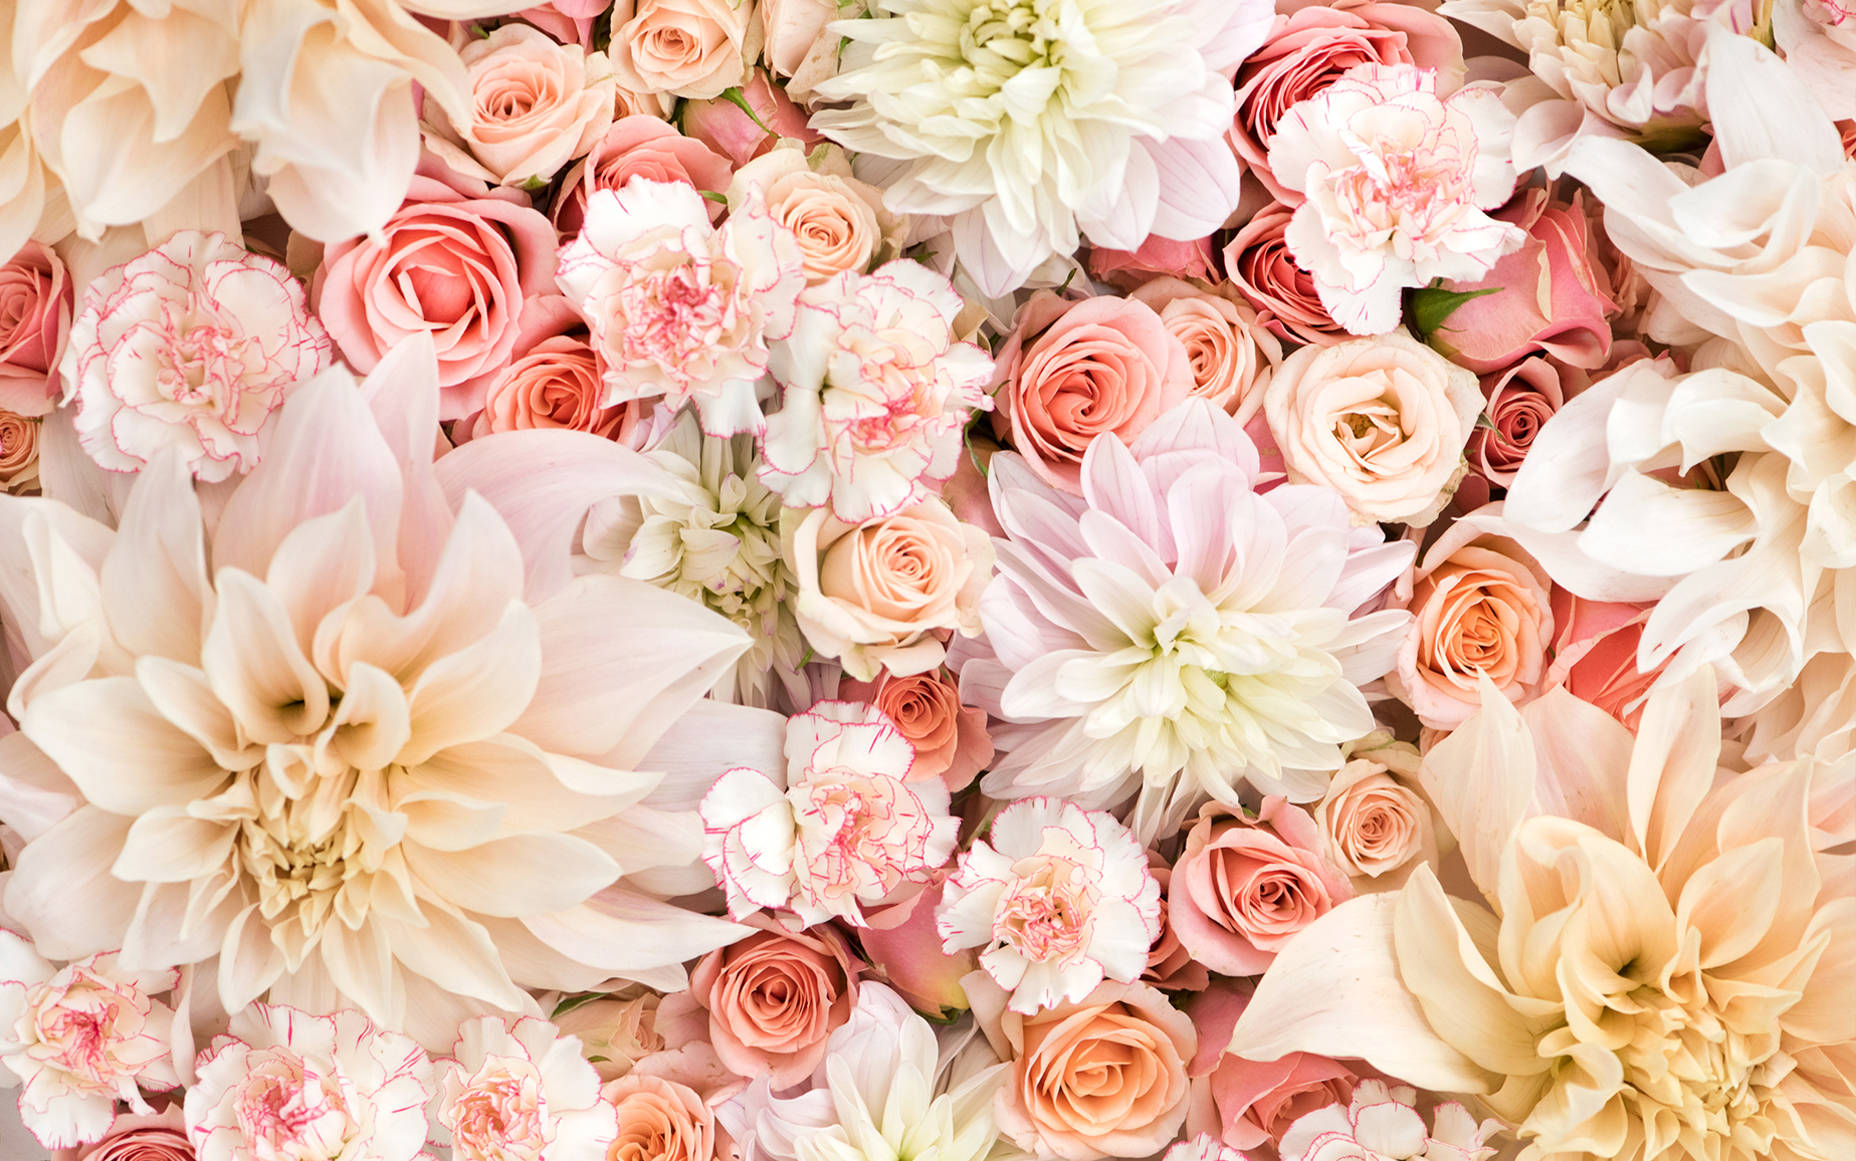 Charming Floral Pastels Aesthetic On A Computer Monitor Wallpaper